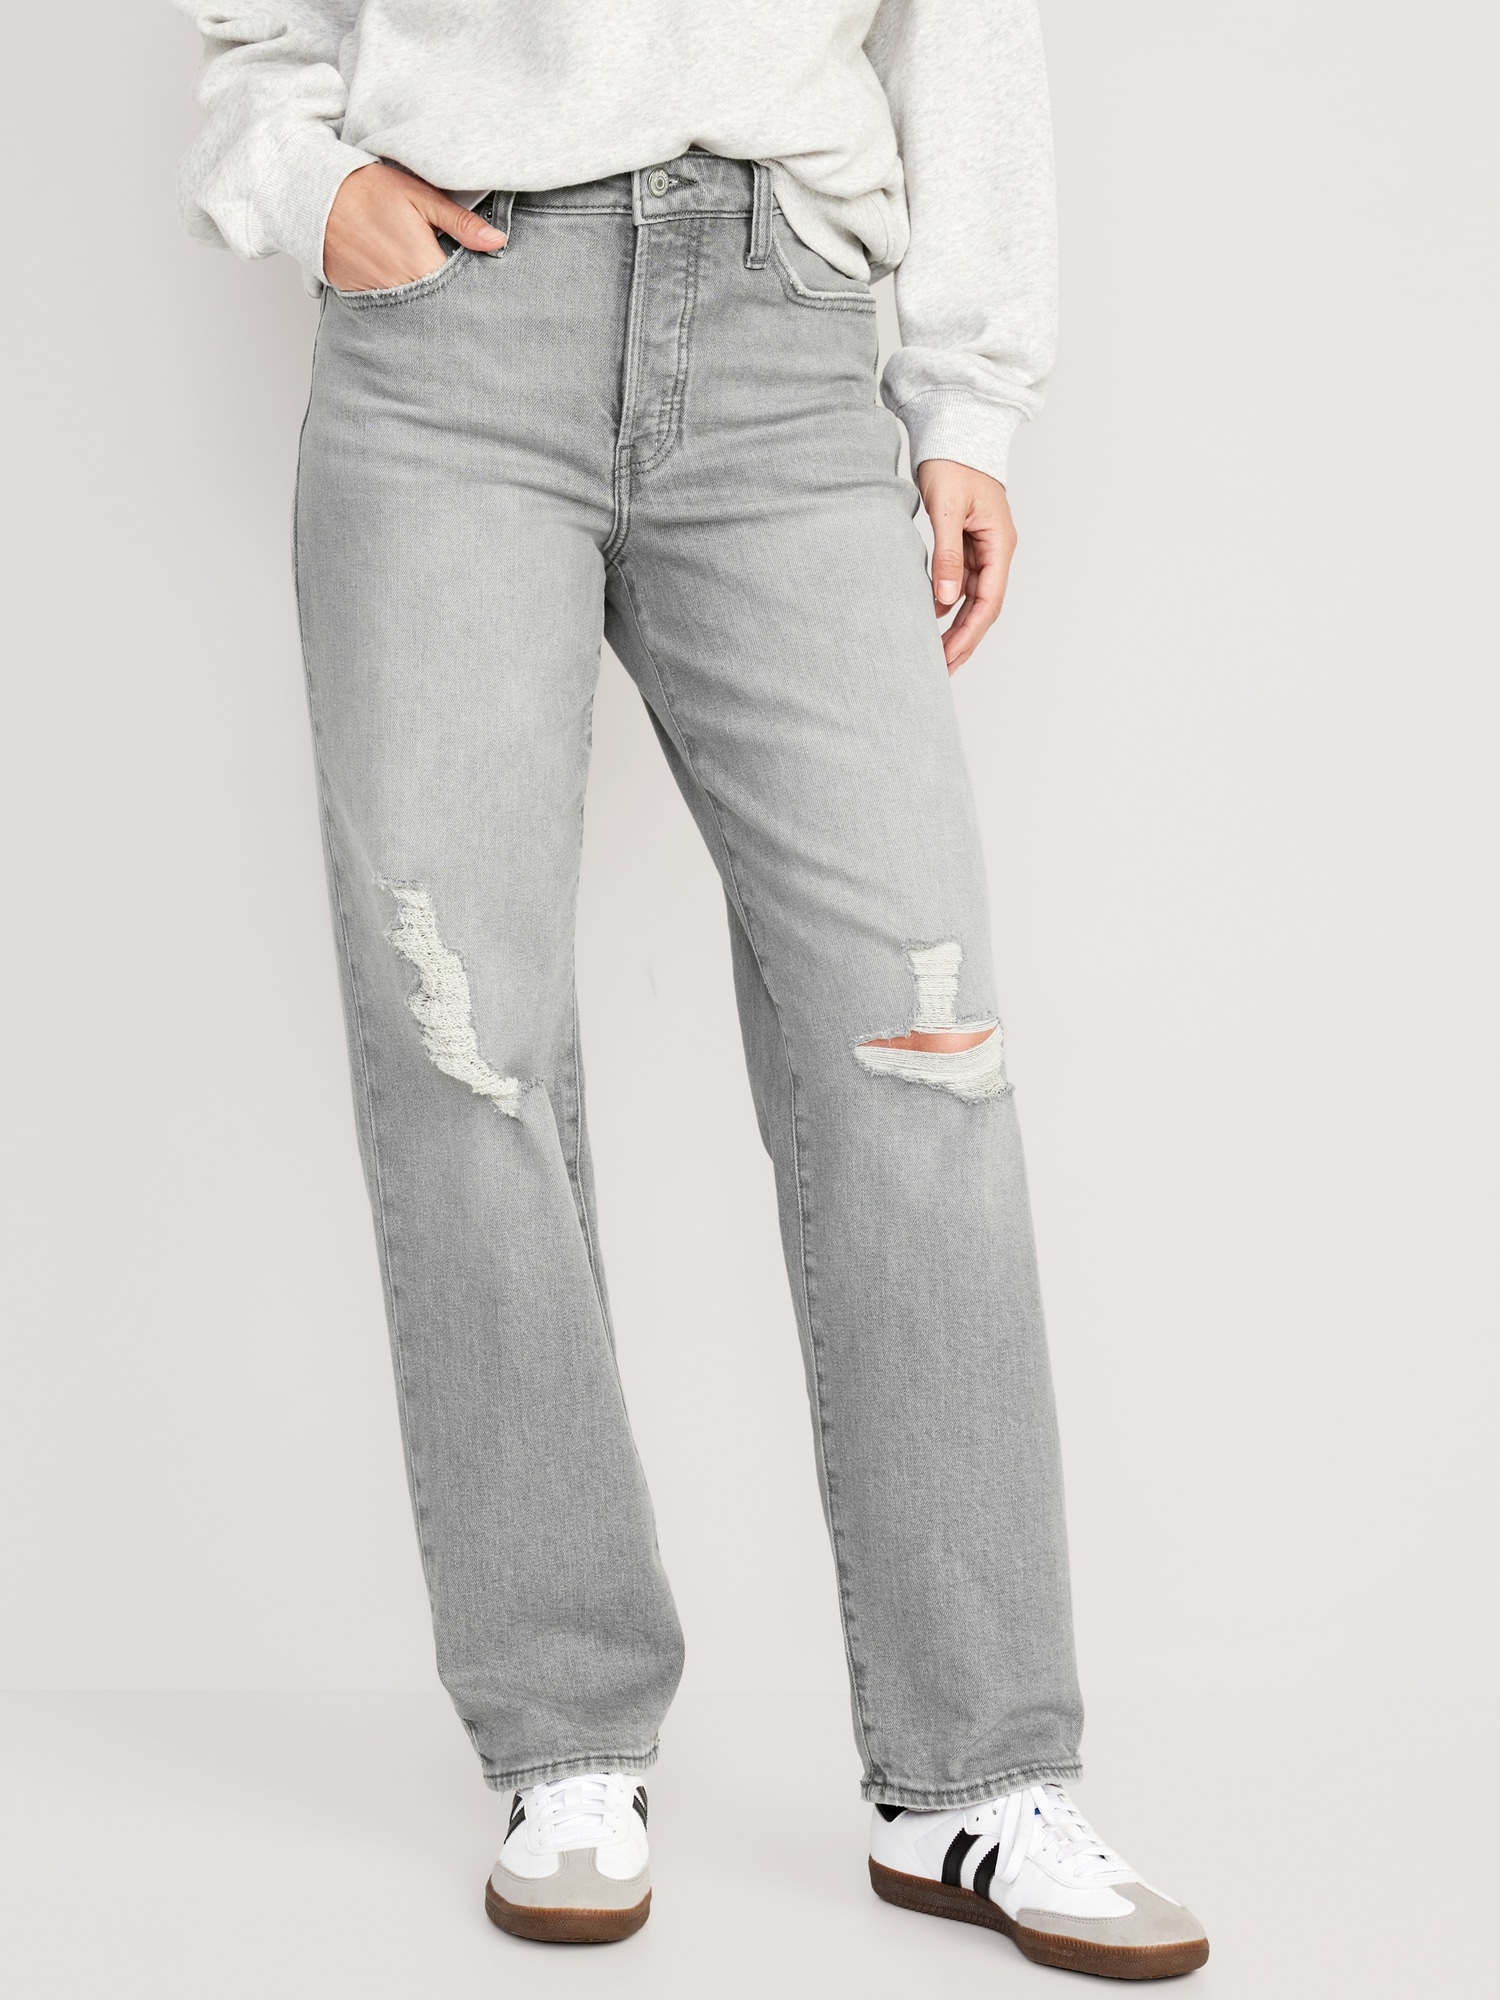 Oldnavy High-Waisted OG Loose Button-Fly Ripped Jeans for Women